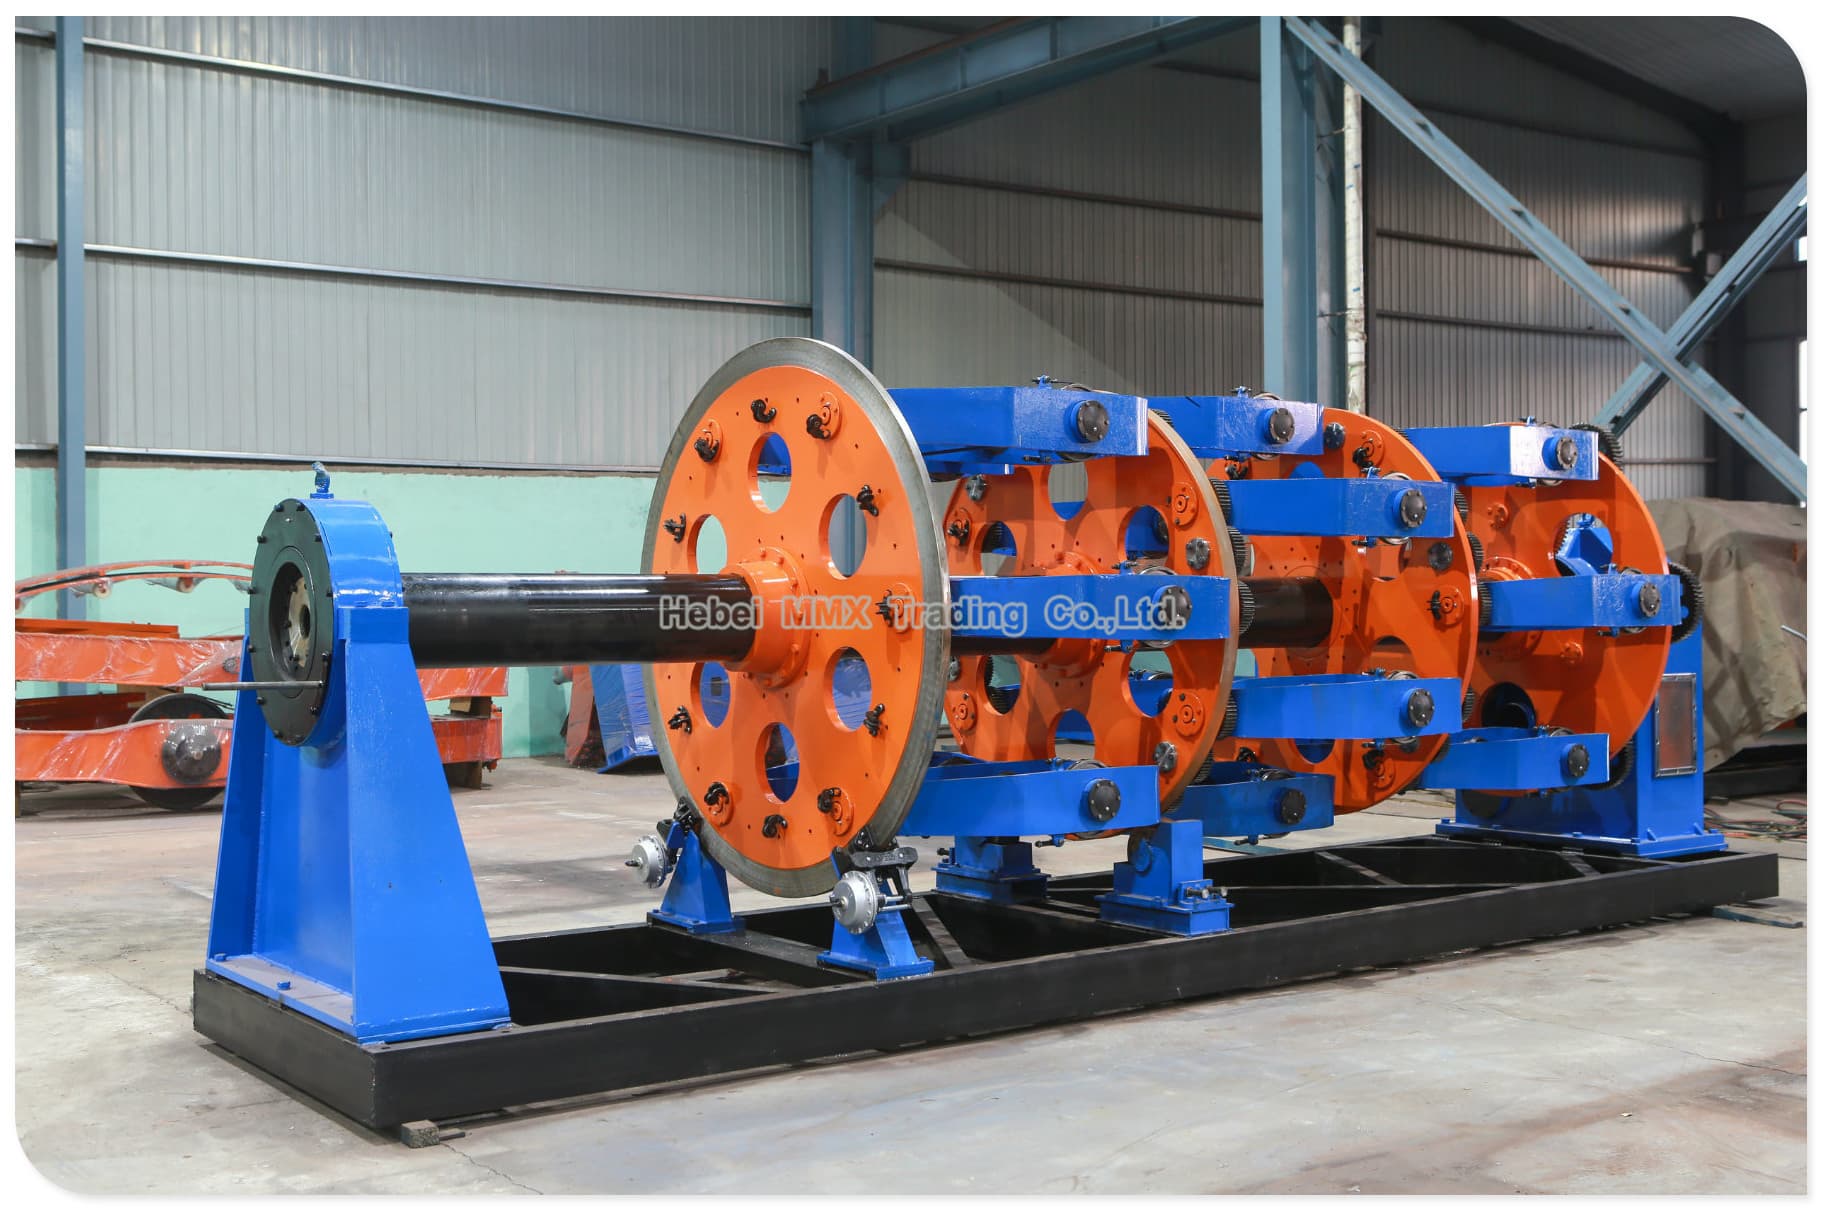 Steel Wire Armouring Machine_ Steel Wire Rope machinery_